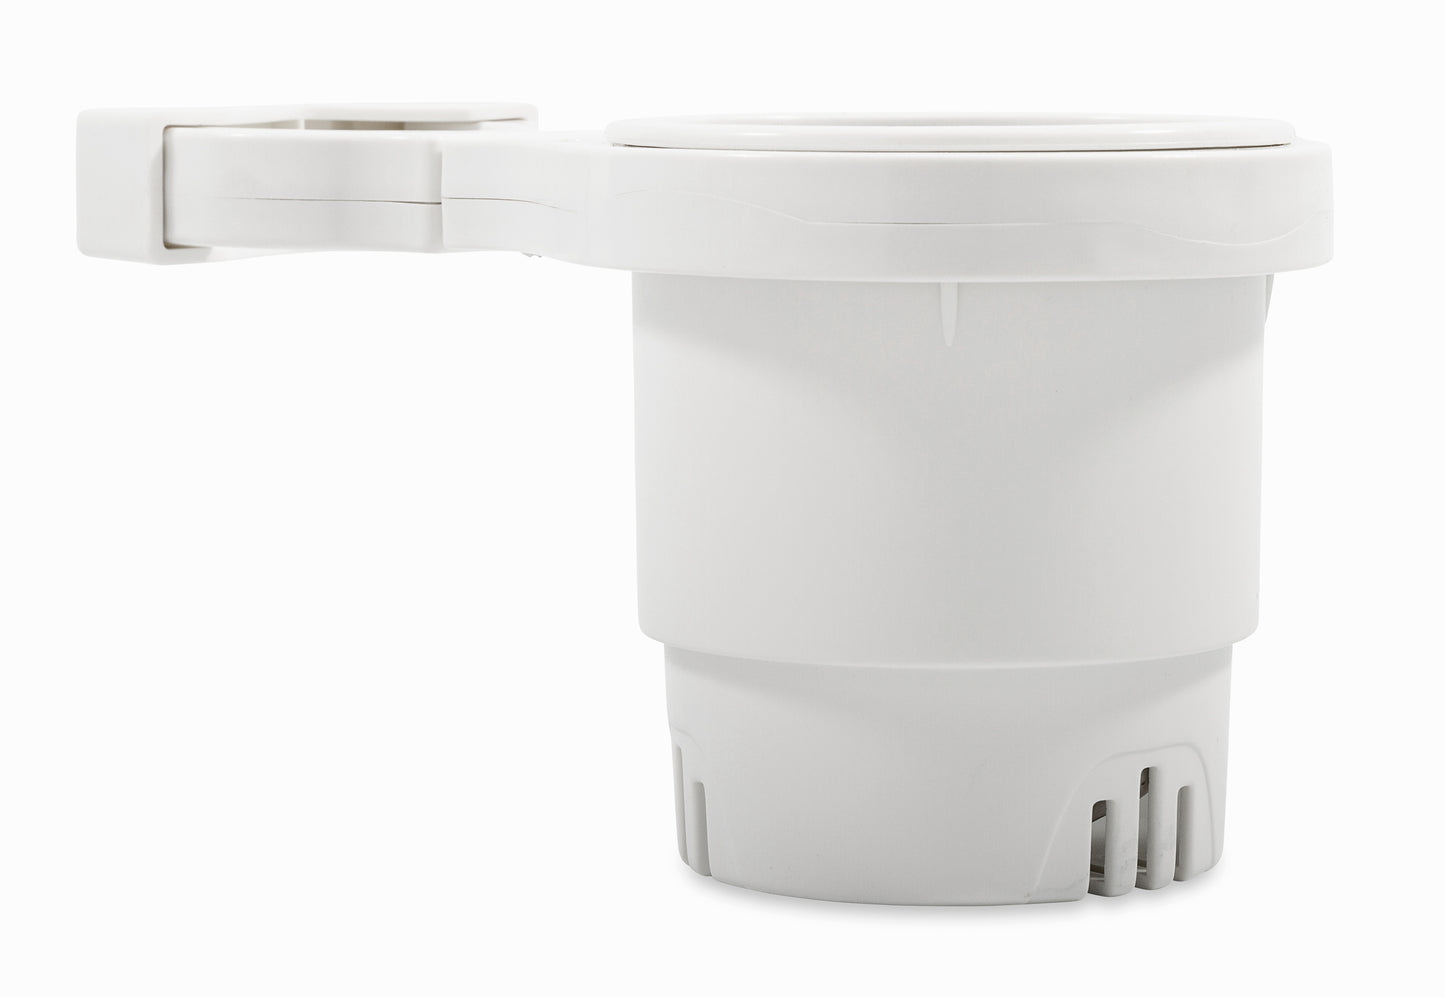 Camco Large Rail Mounted Boat Cup Holder - White